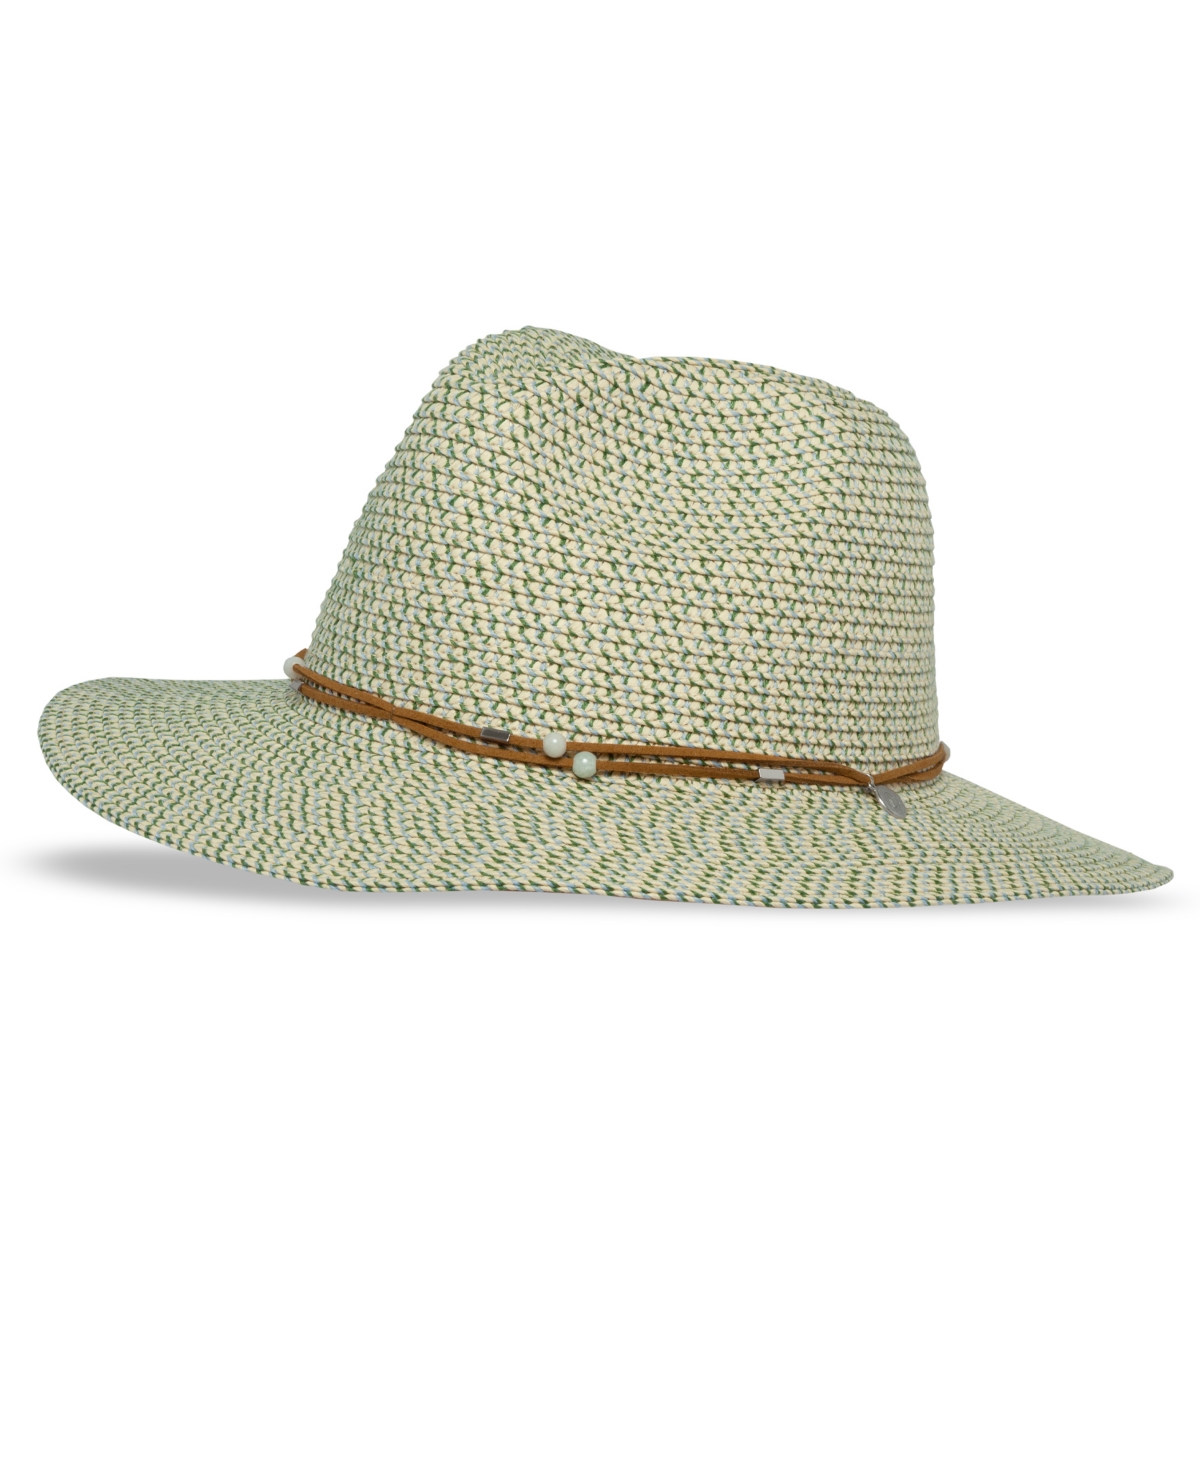 Sunday Afternoons Wanderlust Fedora Hat In Sea Glass